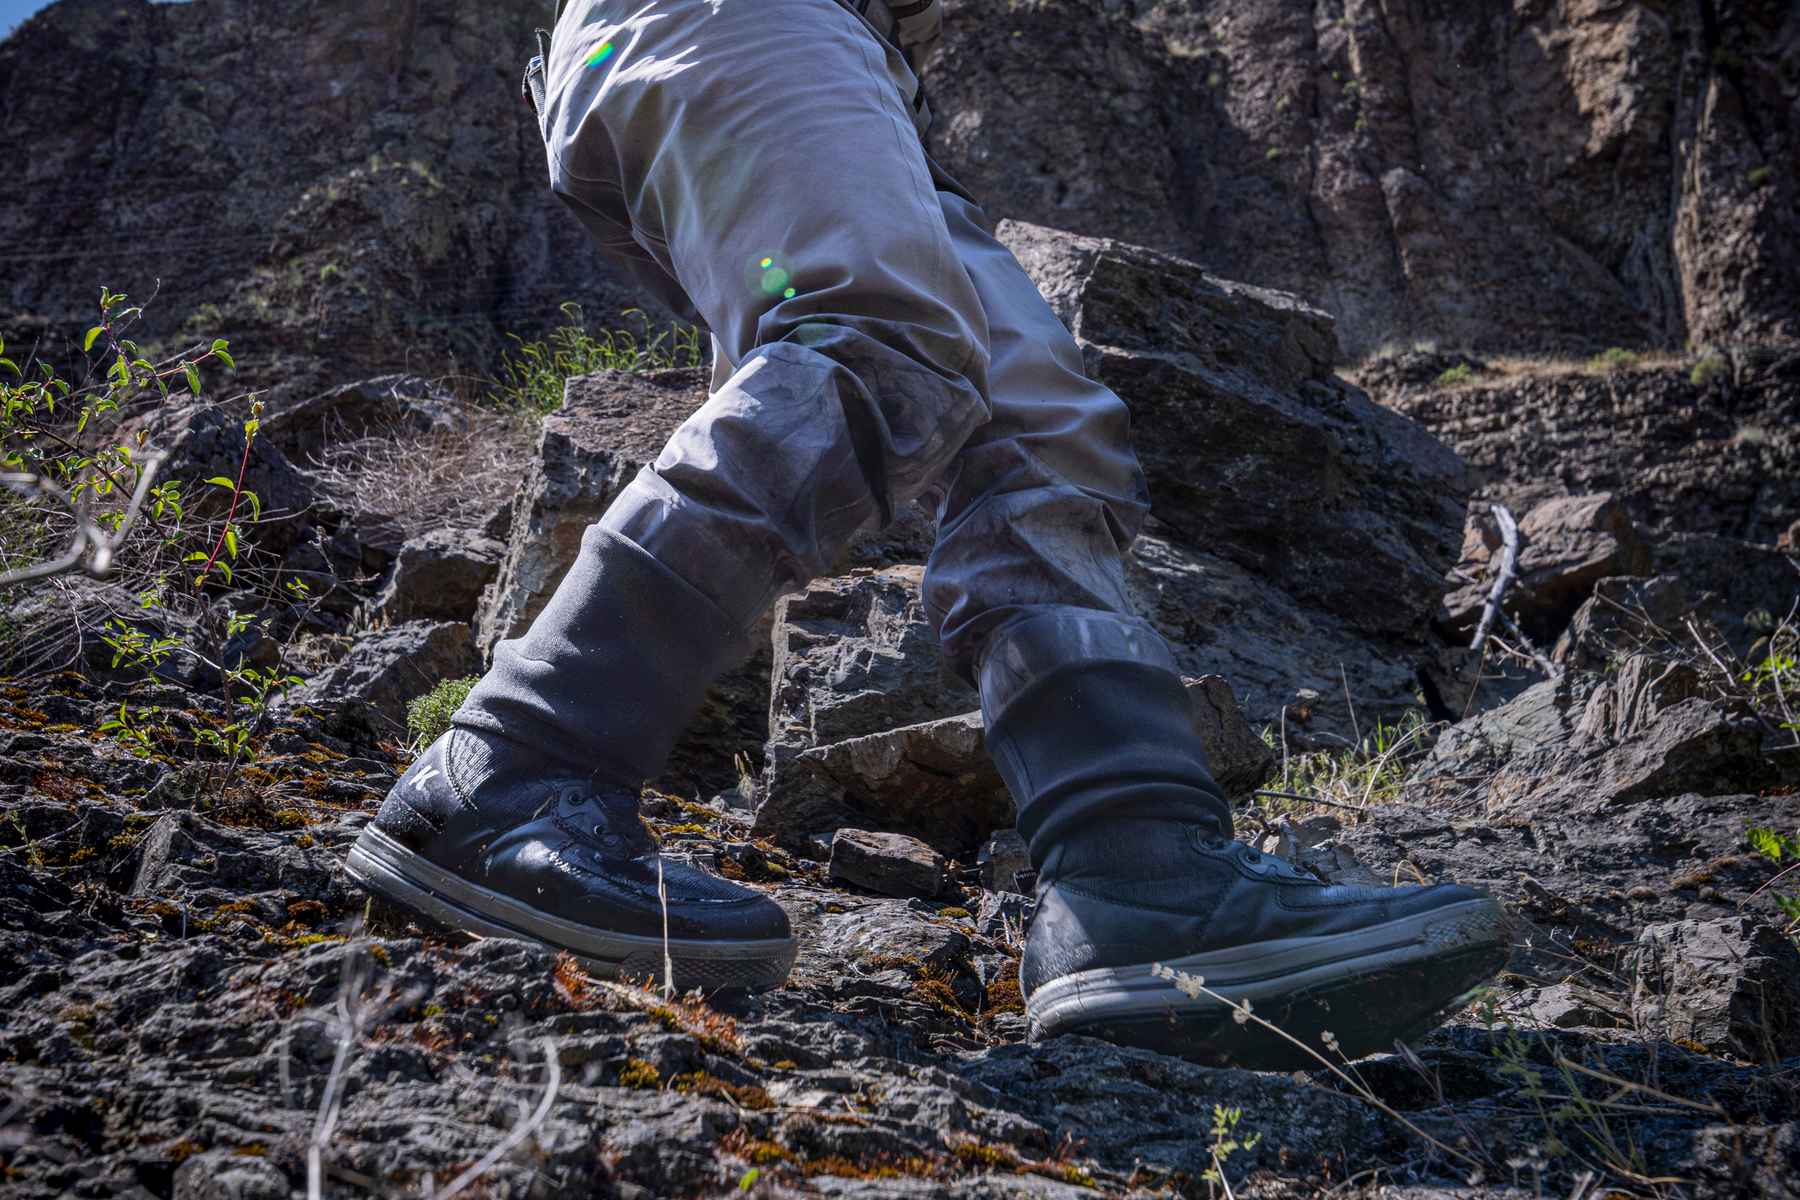 Korkers introduces new Wade-Lite wading boot collection